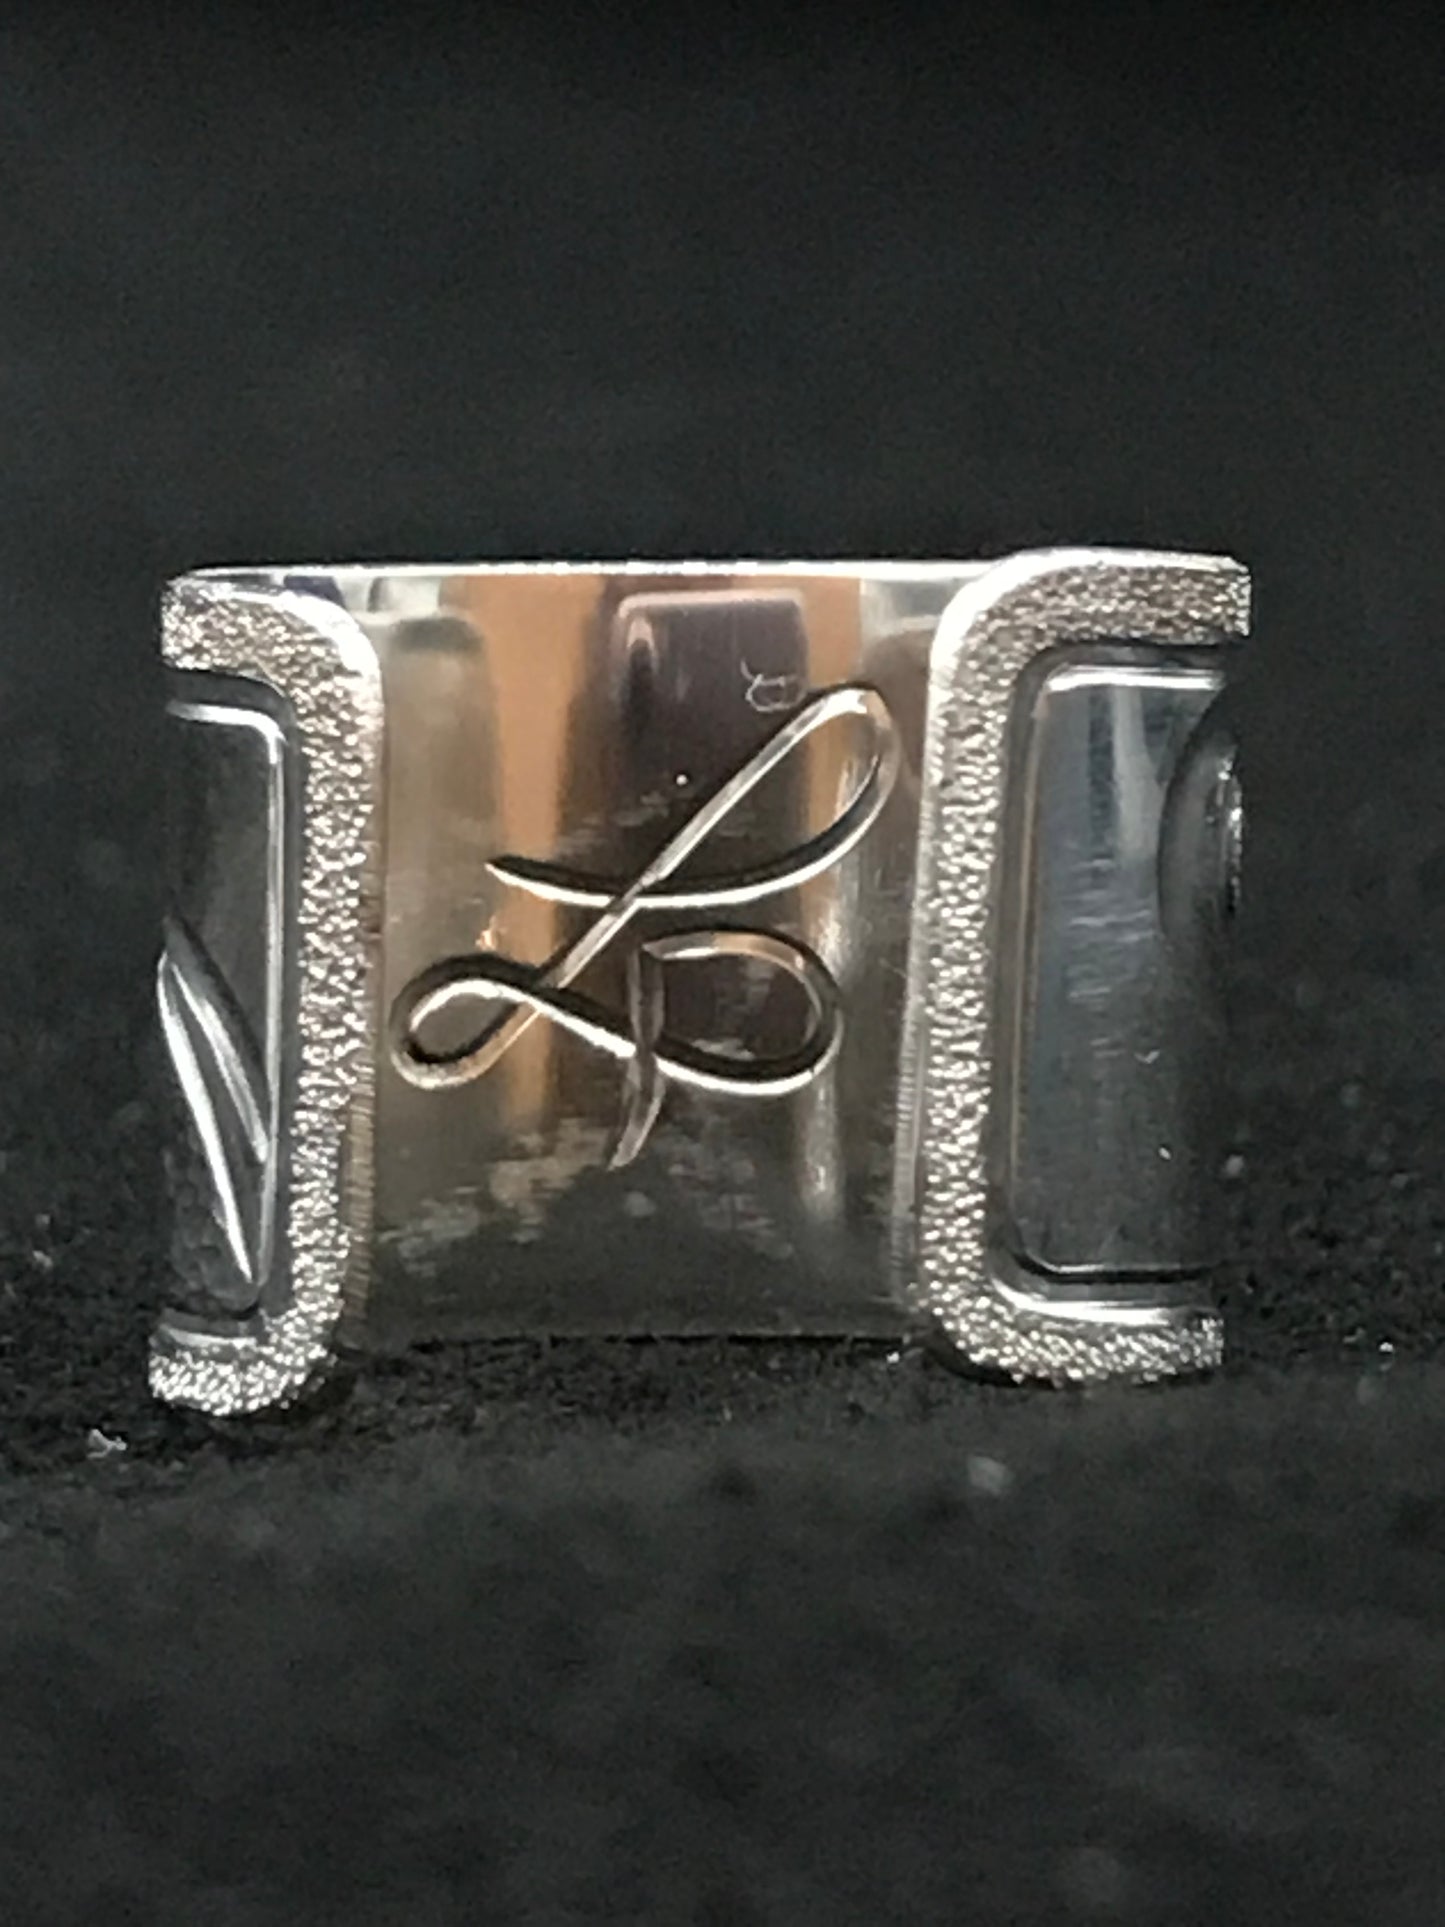 Inside of SS Ear Cuff showing artist's initials by Laura Dutheil.